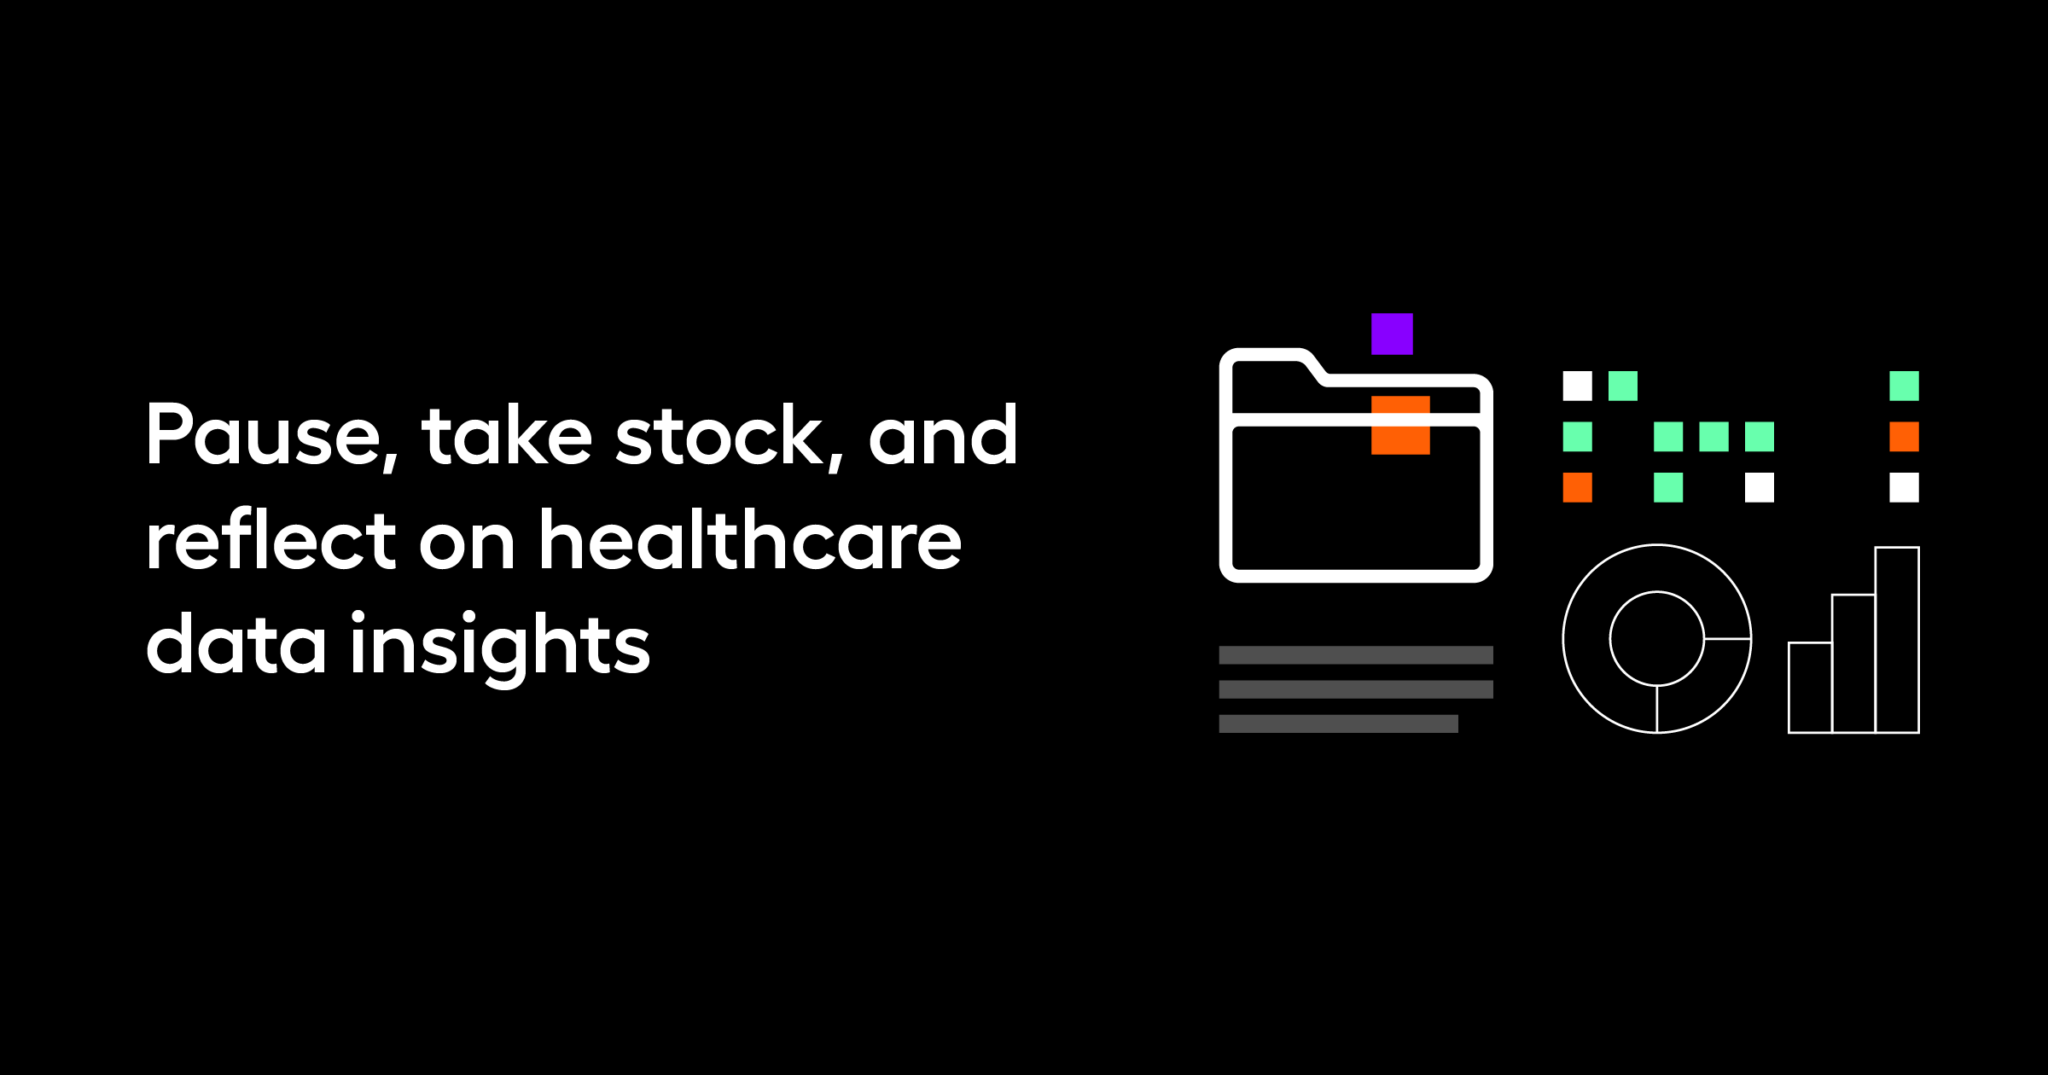 Pause, take stock, and reflect on healthcare data insights